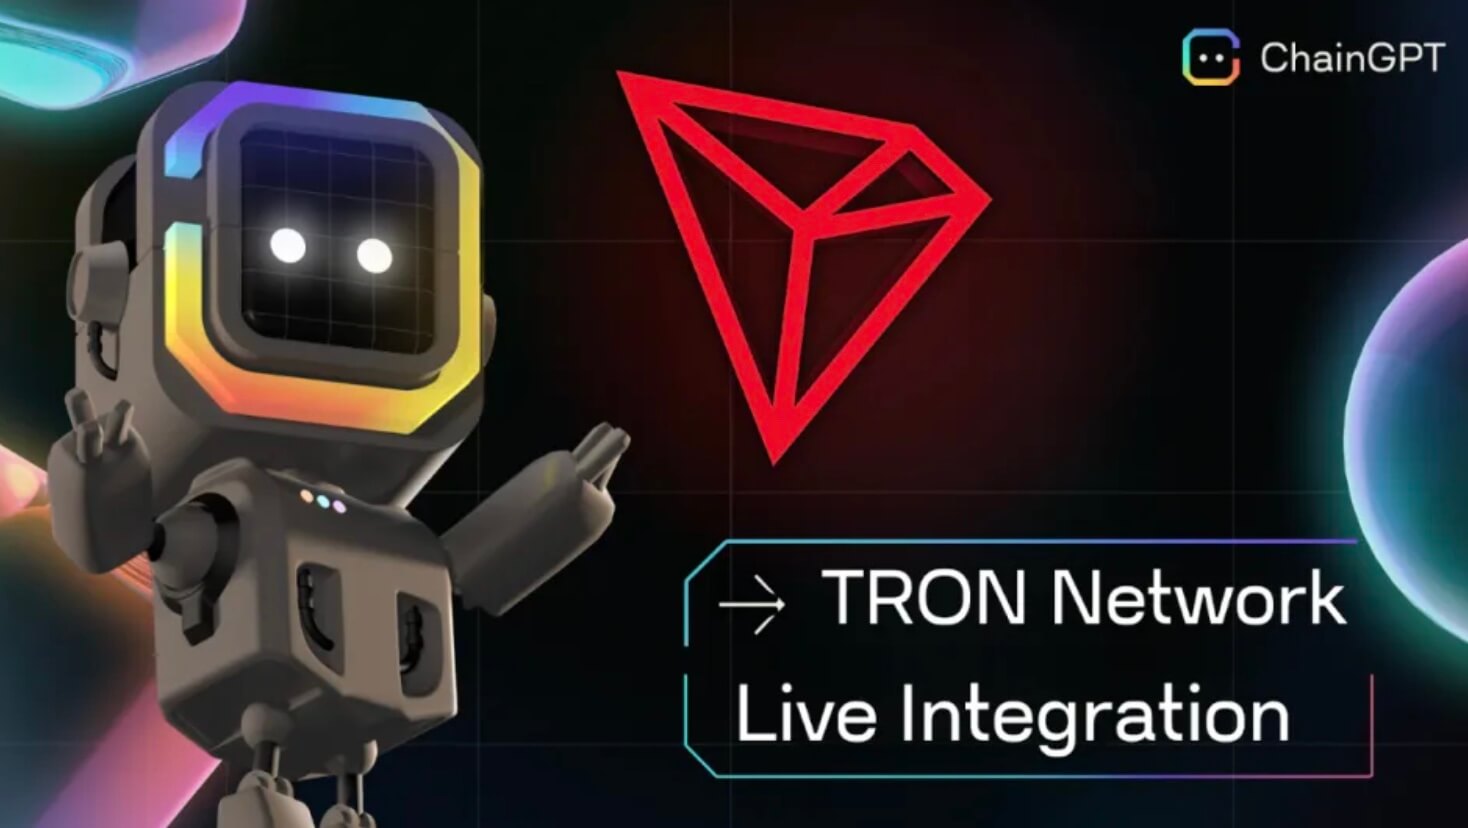 TRON and ChainGPT